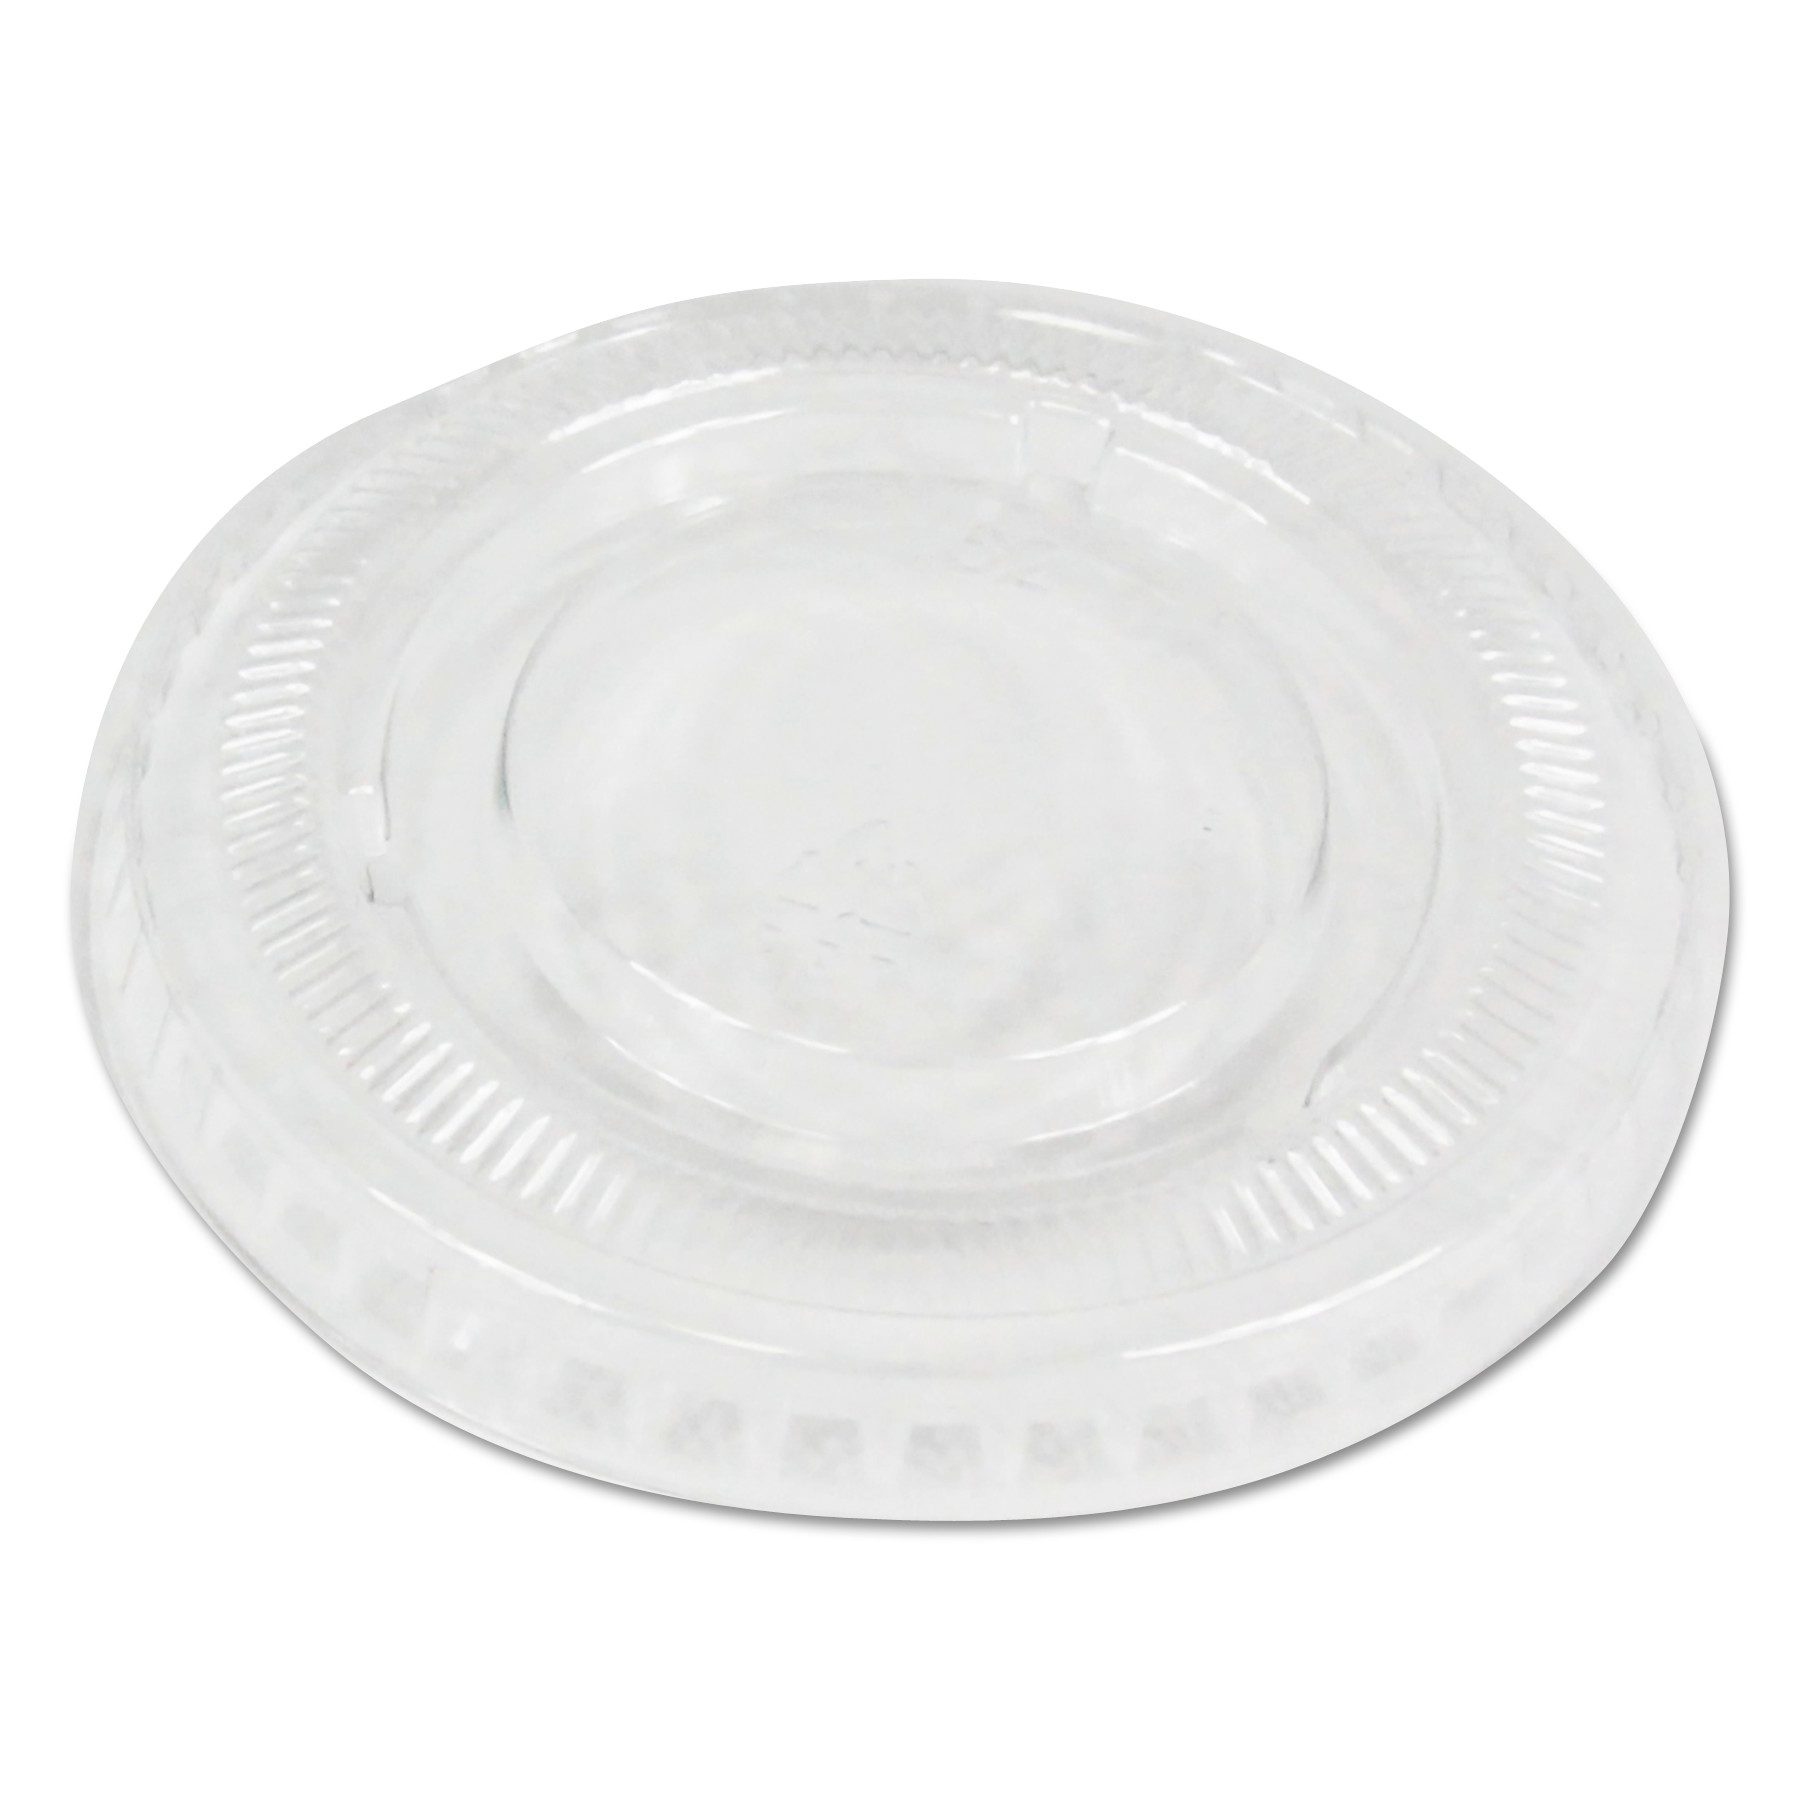 Plastic Portion Cups - 3.25oz PP Portion Cups - Clear - 2,500 ct